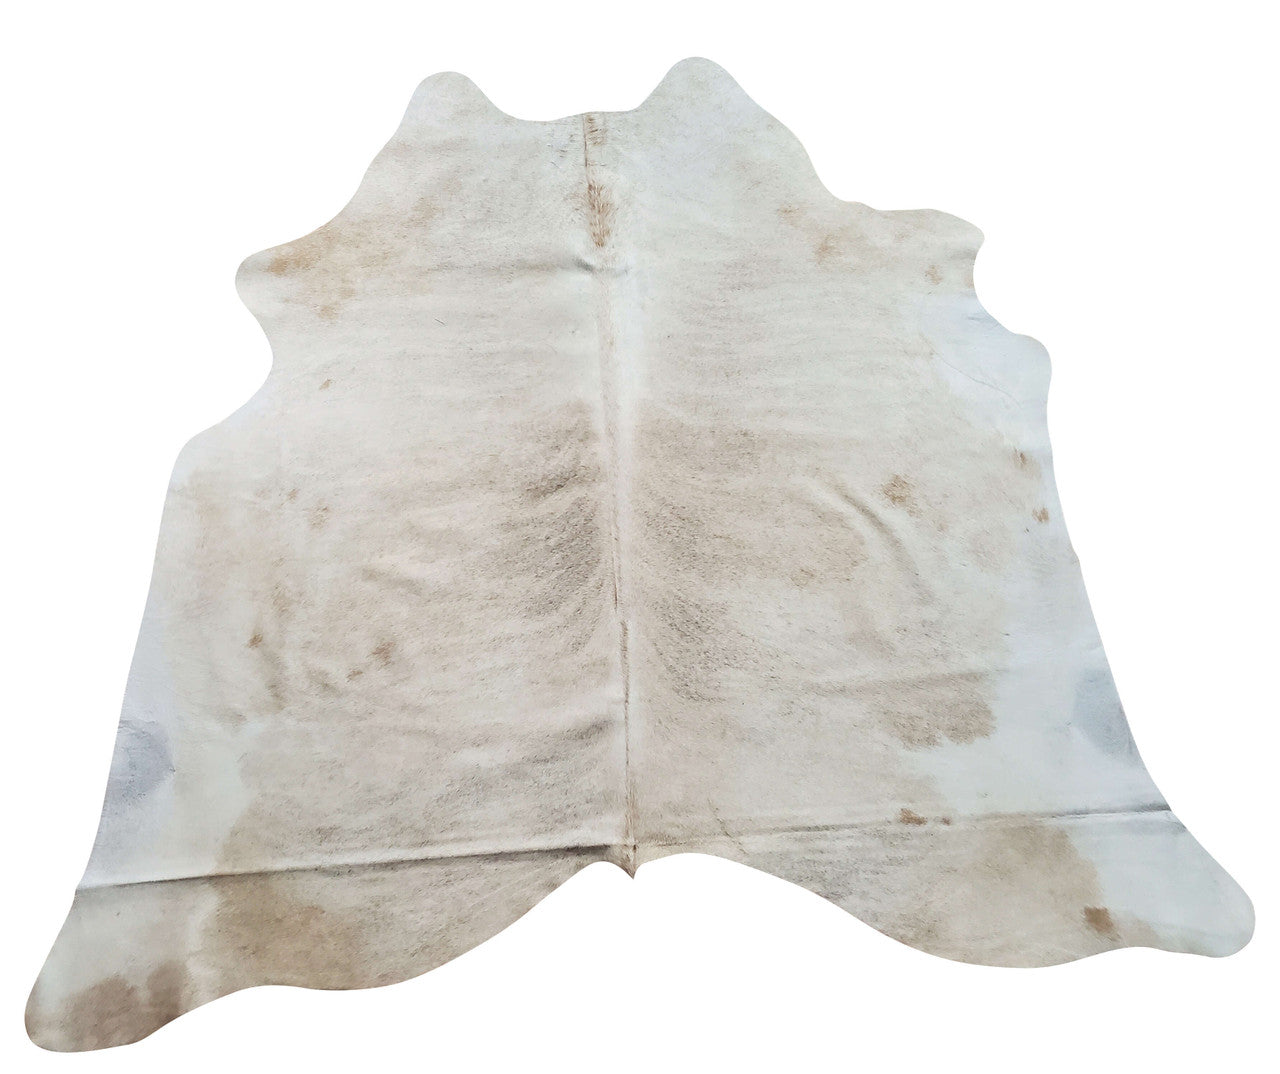 So soft and thick natural cowhide rug, many compliments and you will love walking on it. The colors are great and you will Receive it way faster than expected